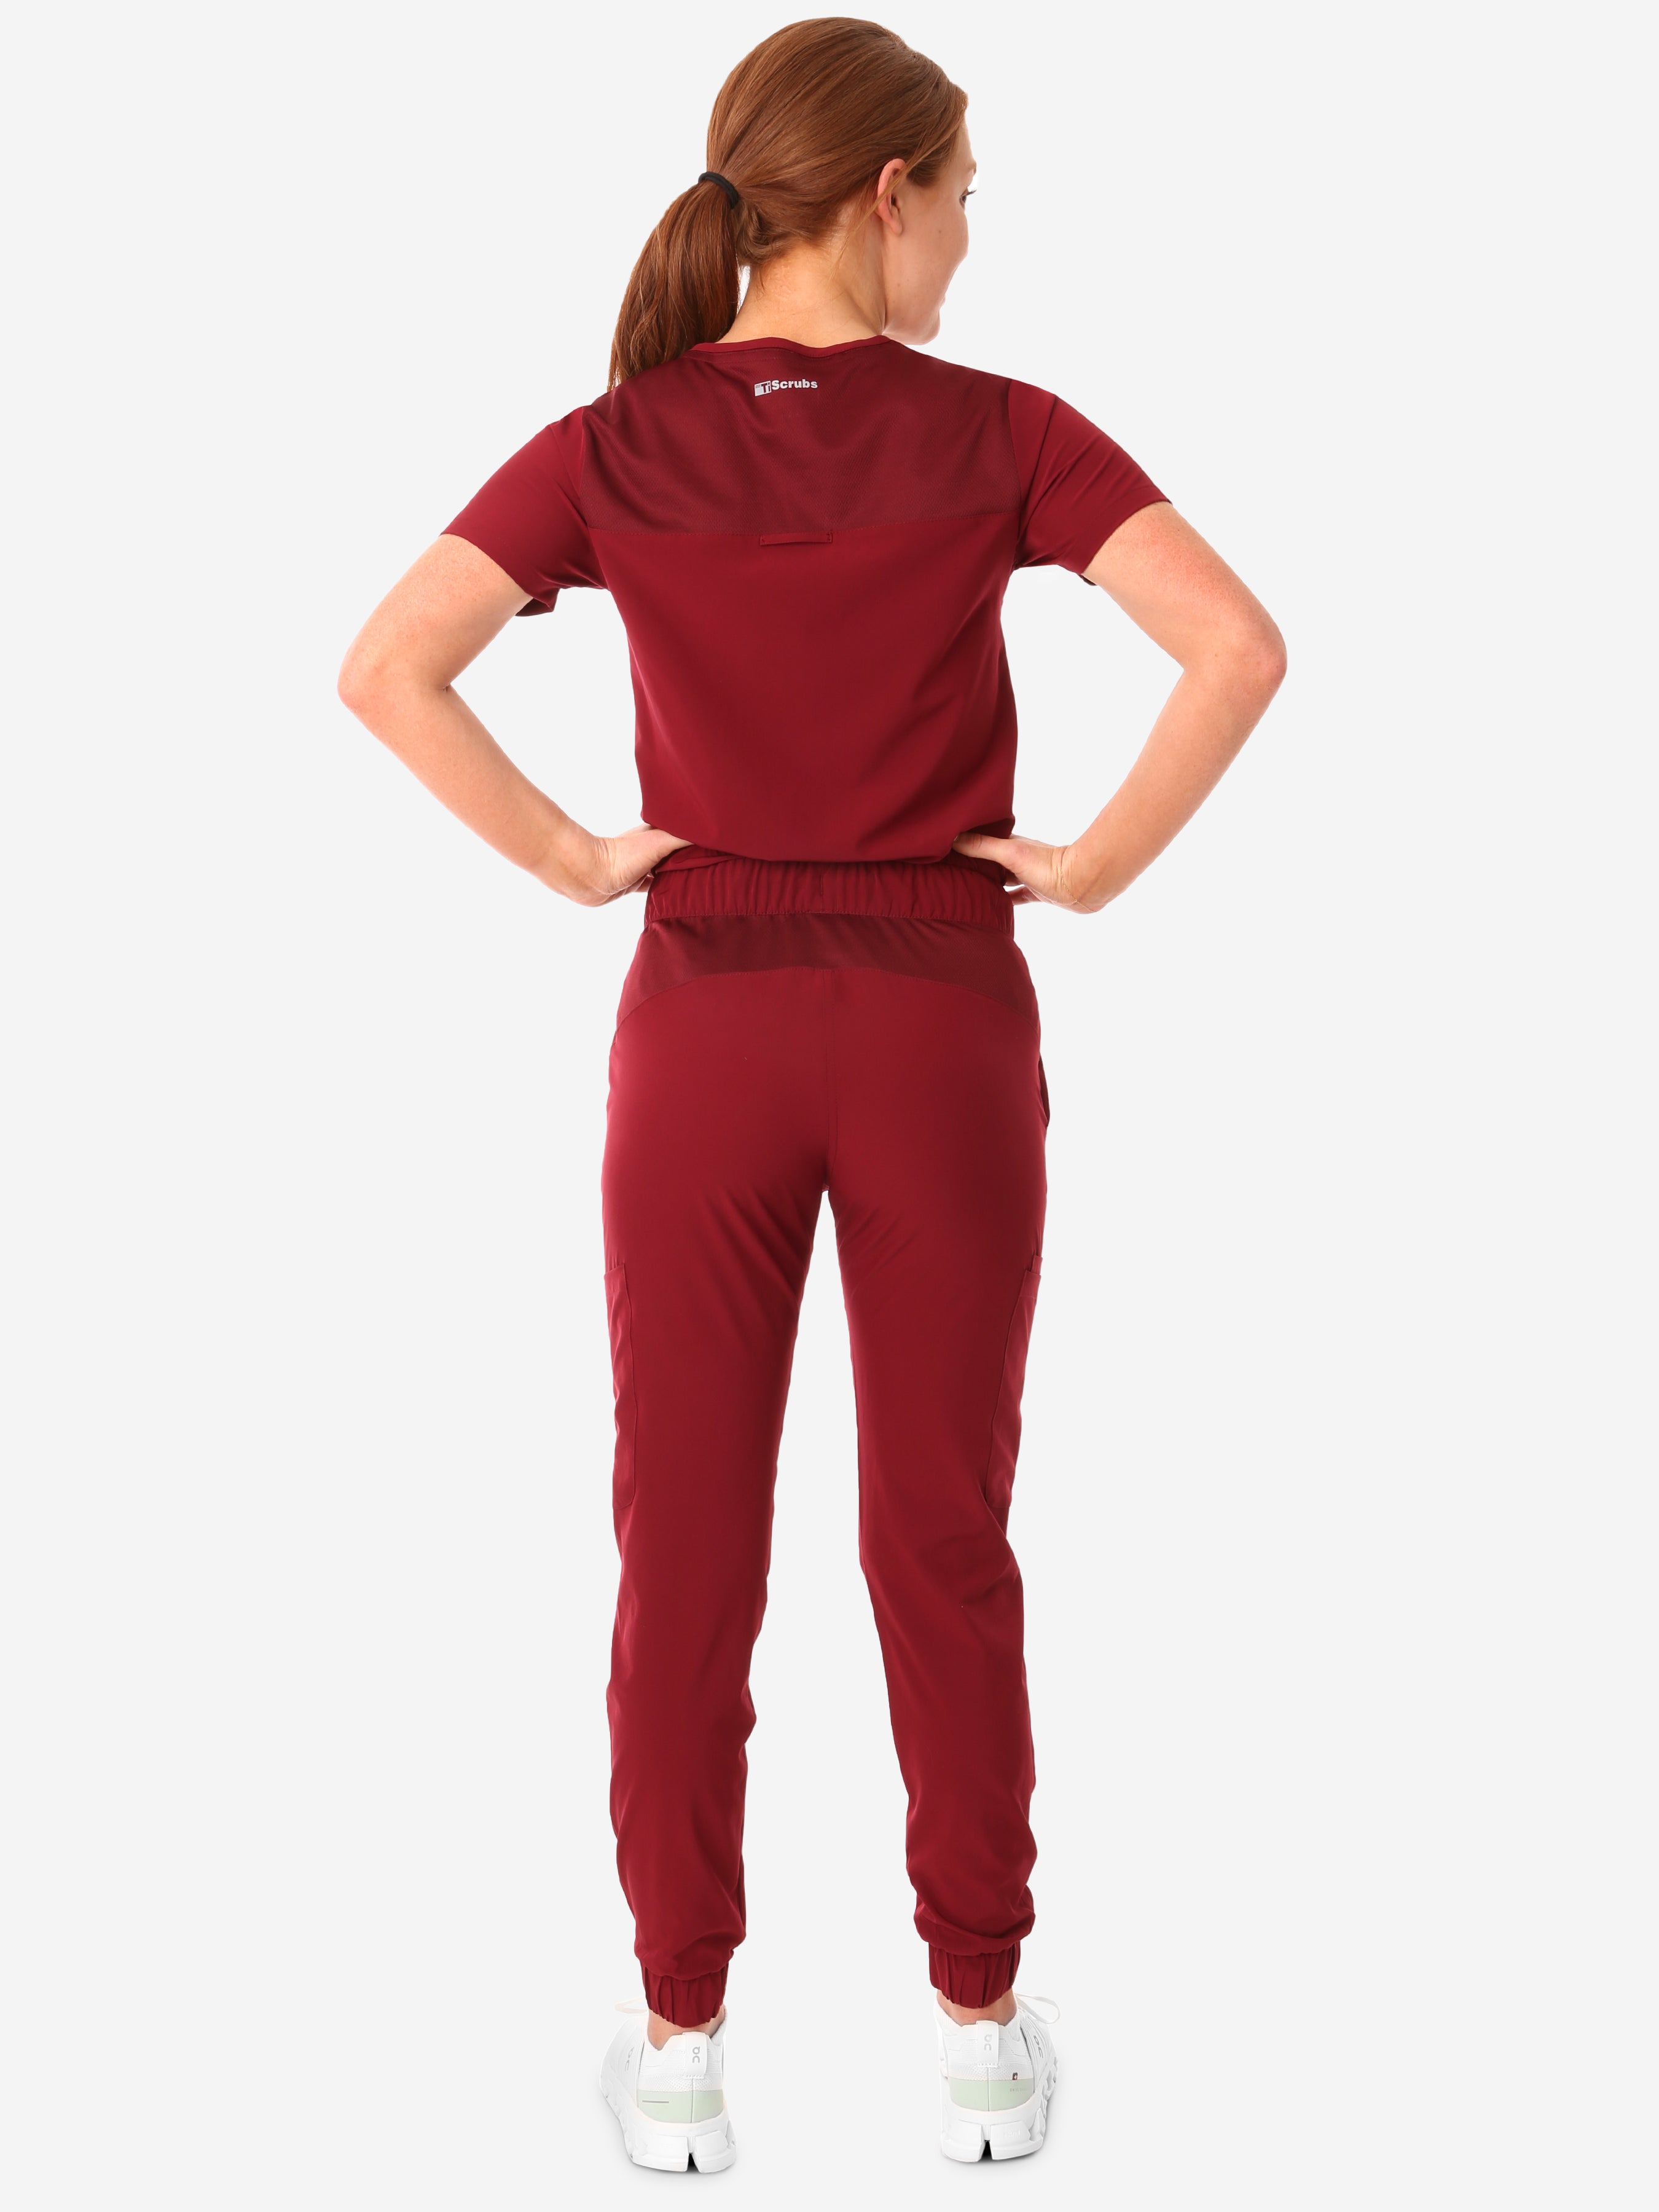 TiScrubs Bold Burgundy Women&#39;s Stretch Perfect Jogger Pants and One-Pocket Tuckable Top Back View Full Body